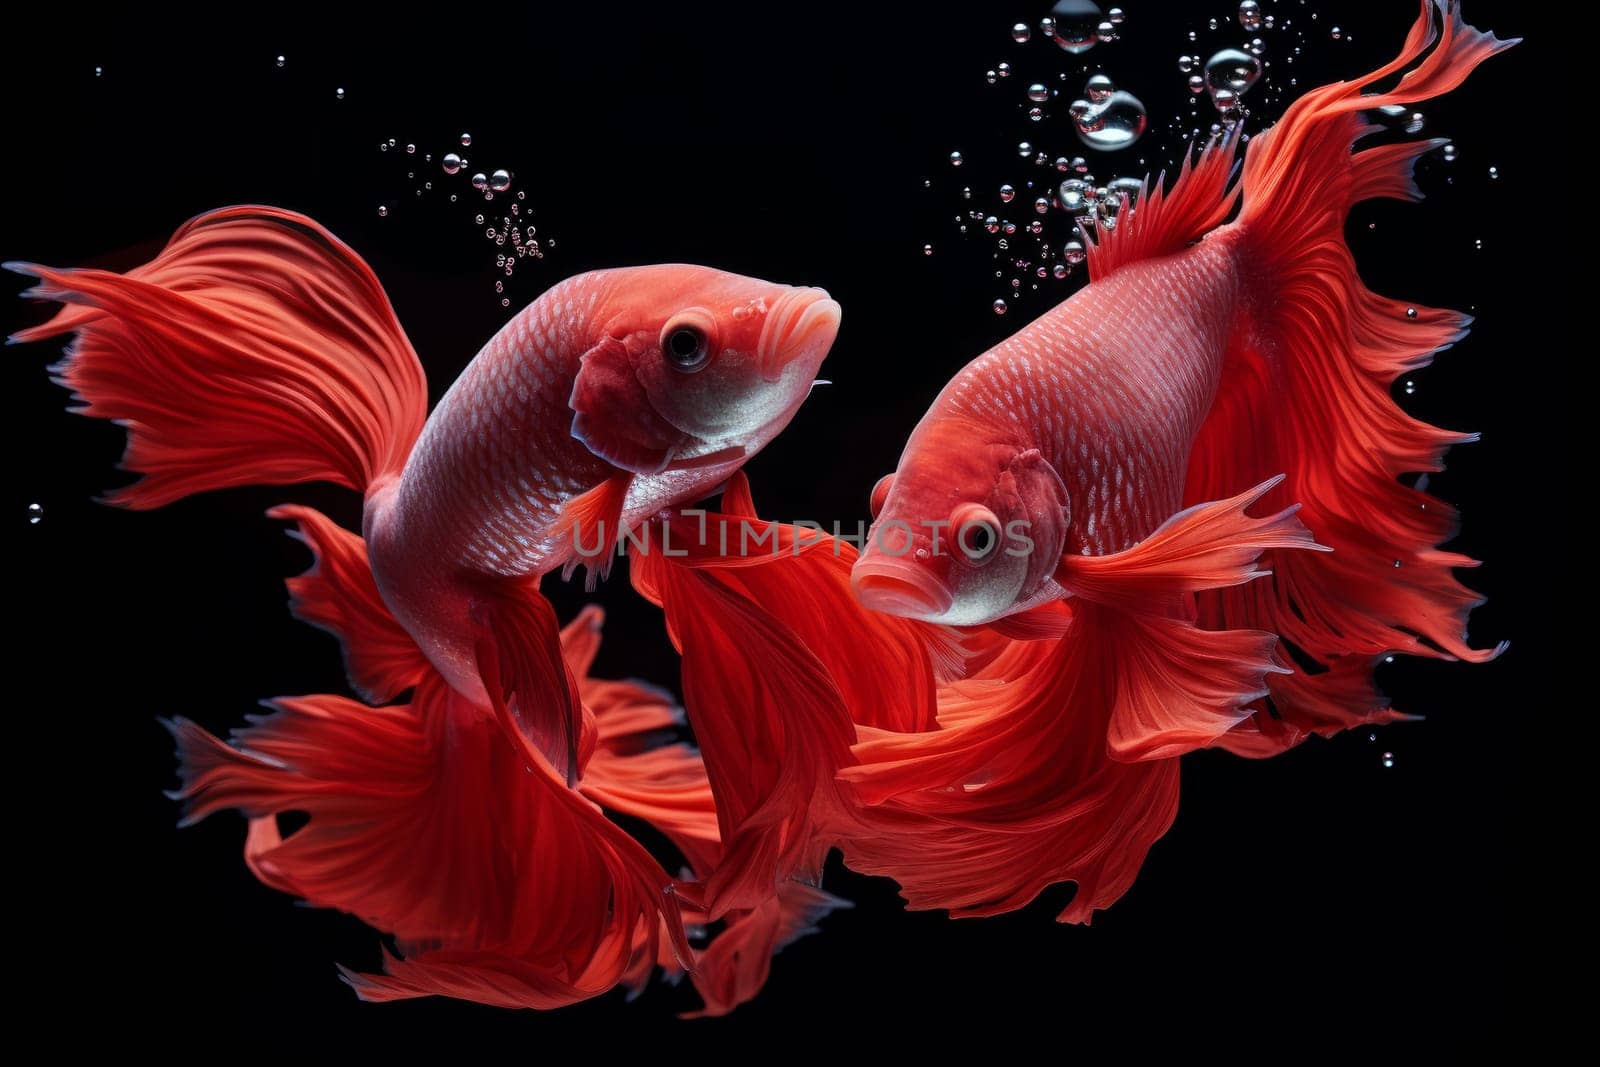 Exotic Red fighting fishes. Underwater animals by ylivdesign